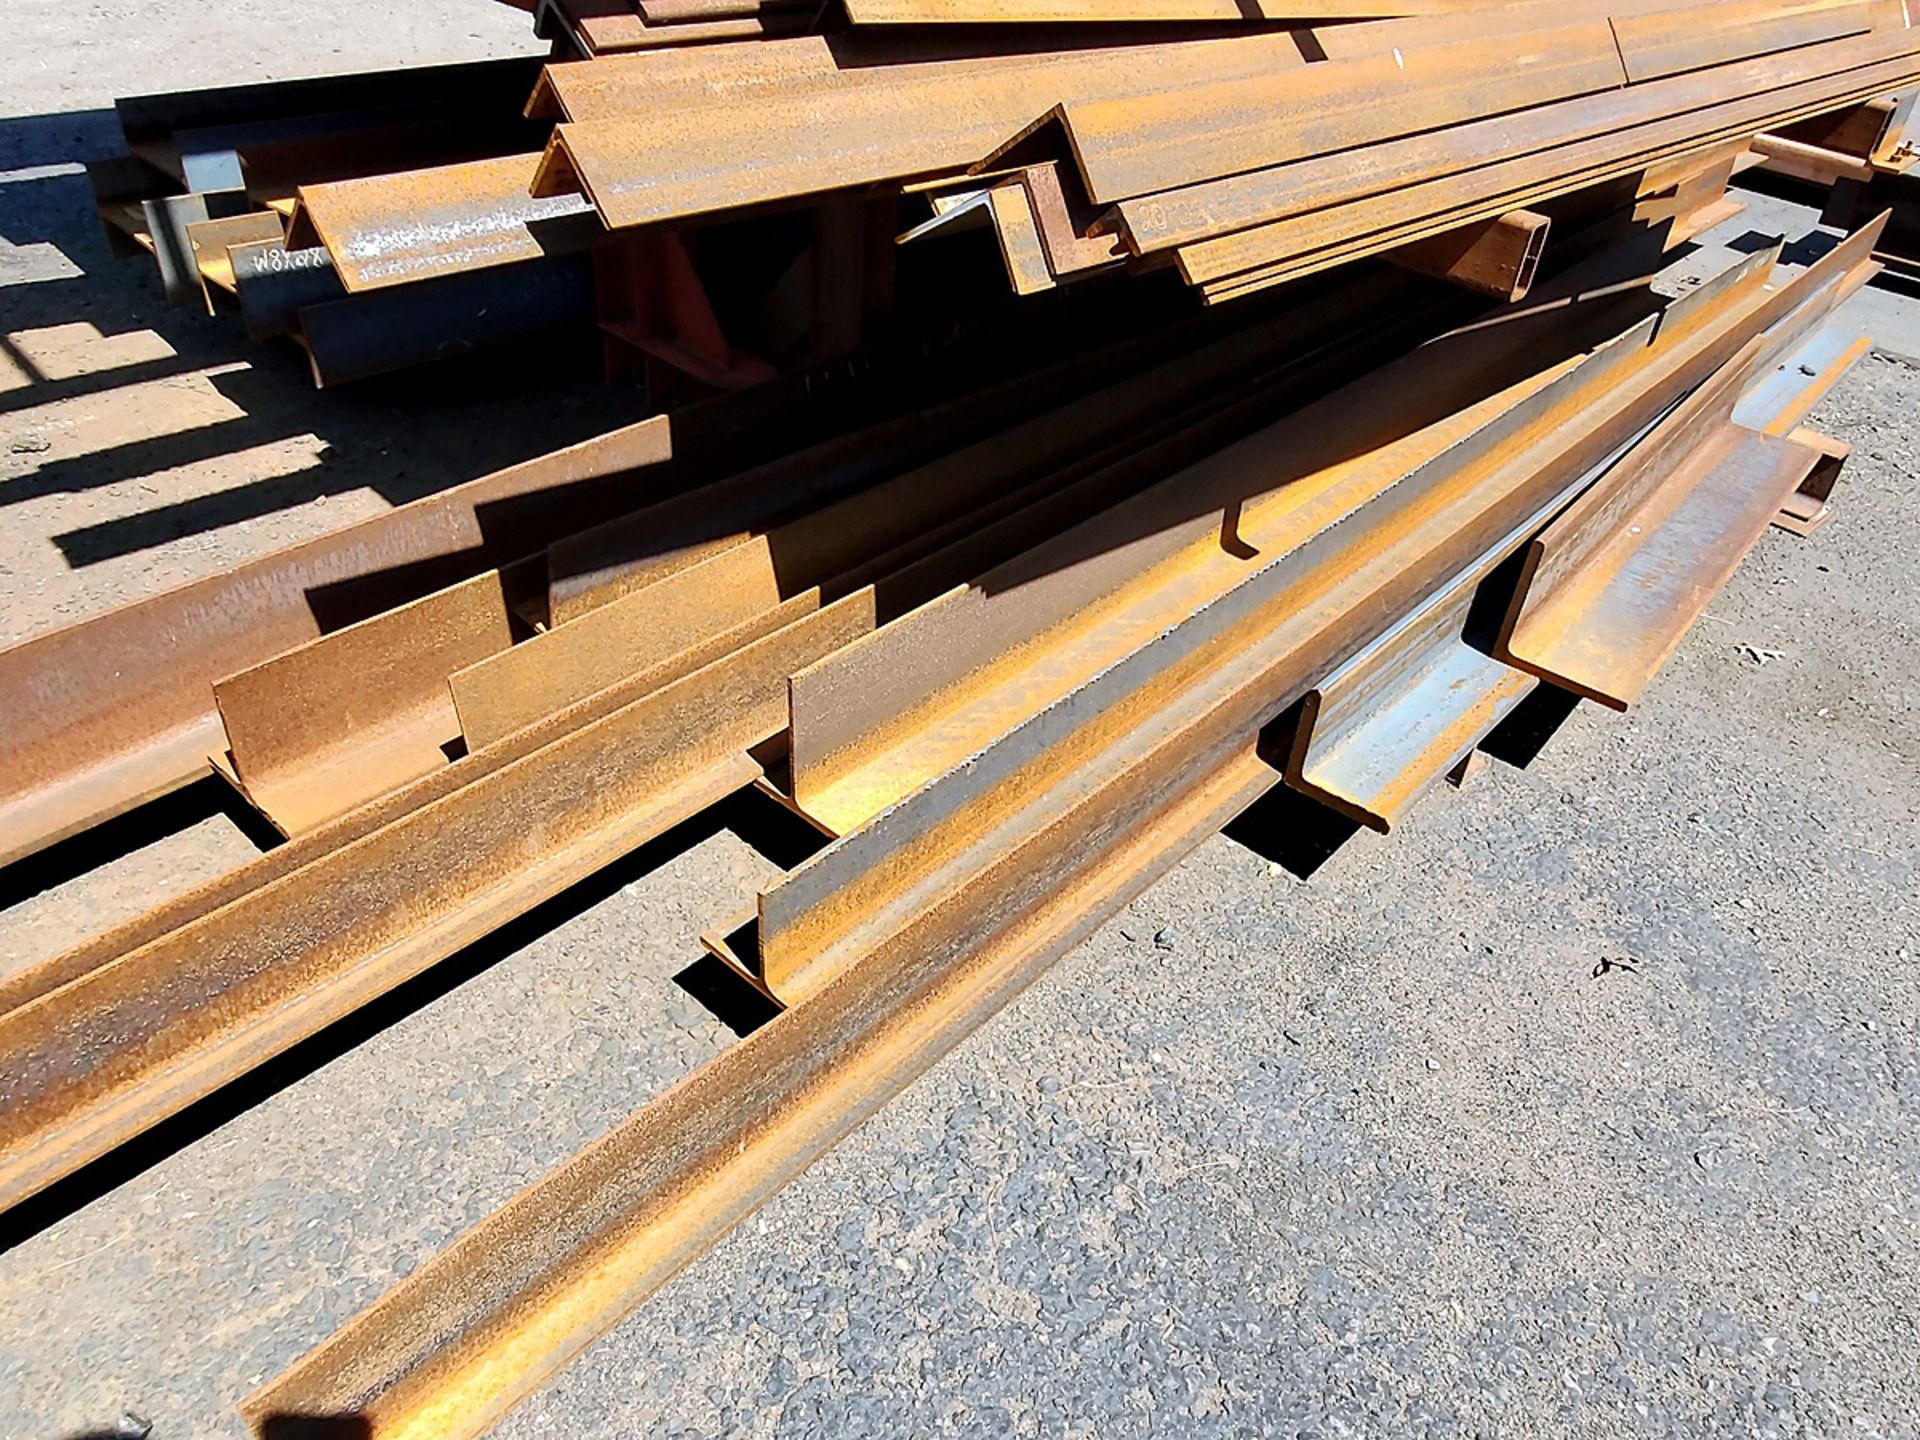 A Group of Ass't Size Steel Angle Iron, U-Channel Beams, T Beams, and Mountable Ladders on Rack - Image 3 of 3